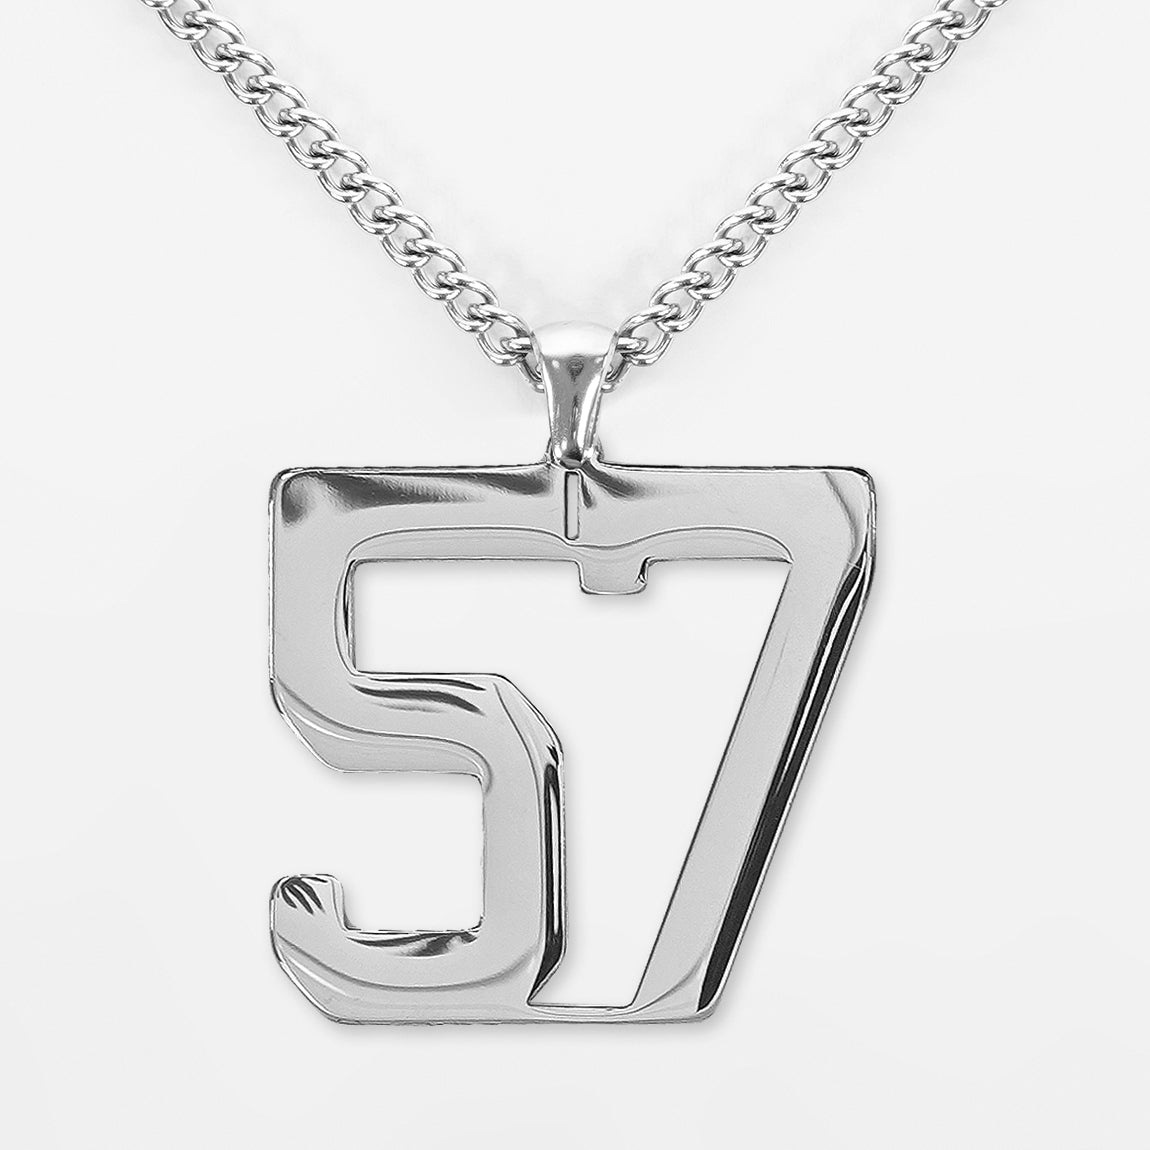 57 Number Pendant with Chain Necklace - Stainless Steel